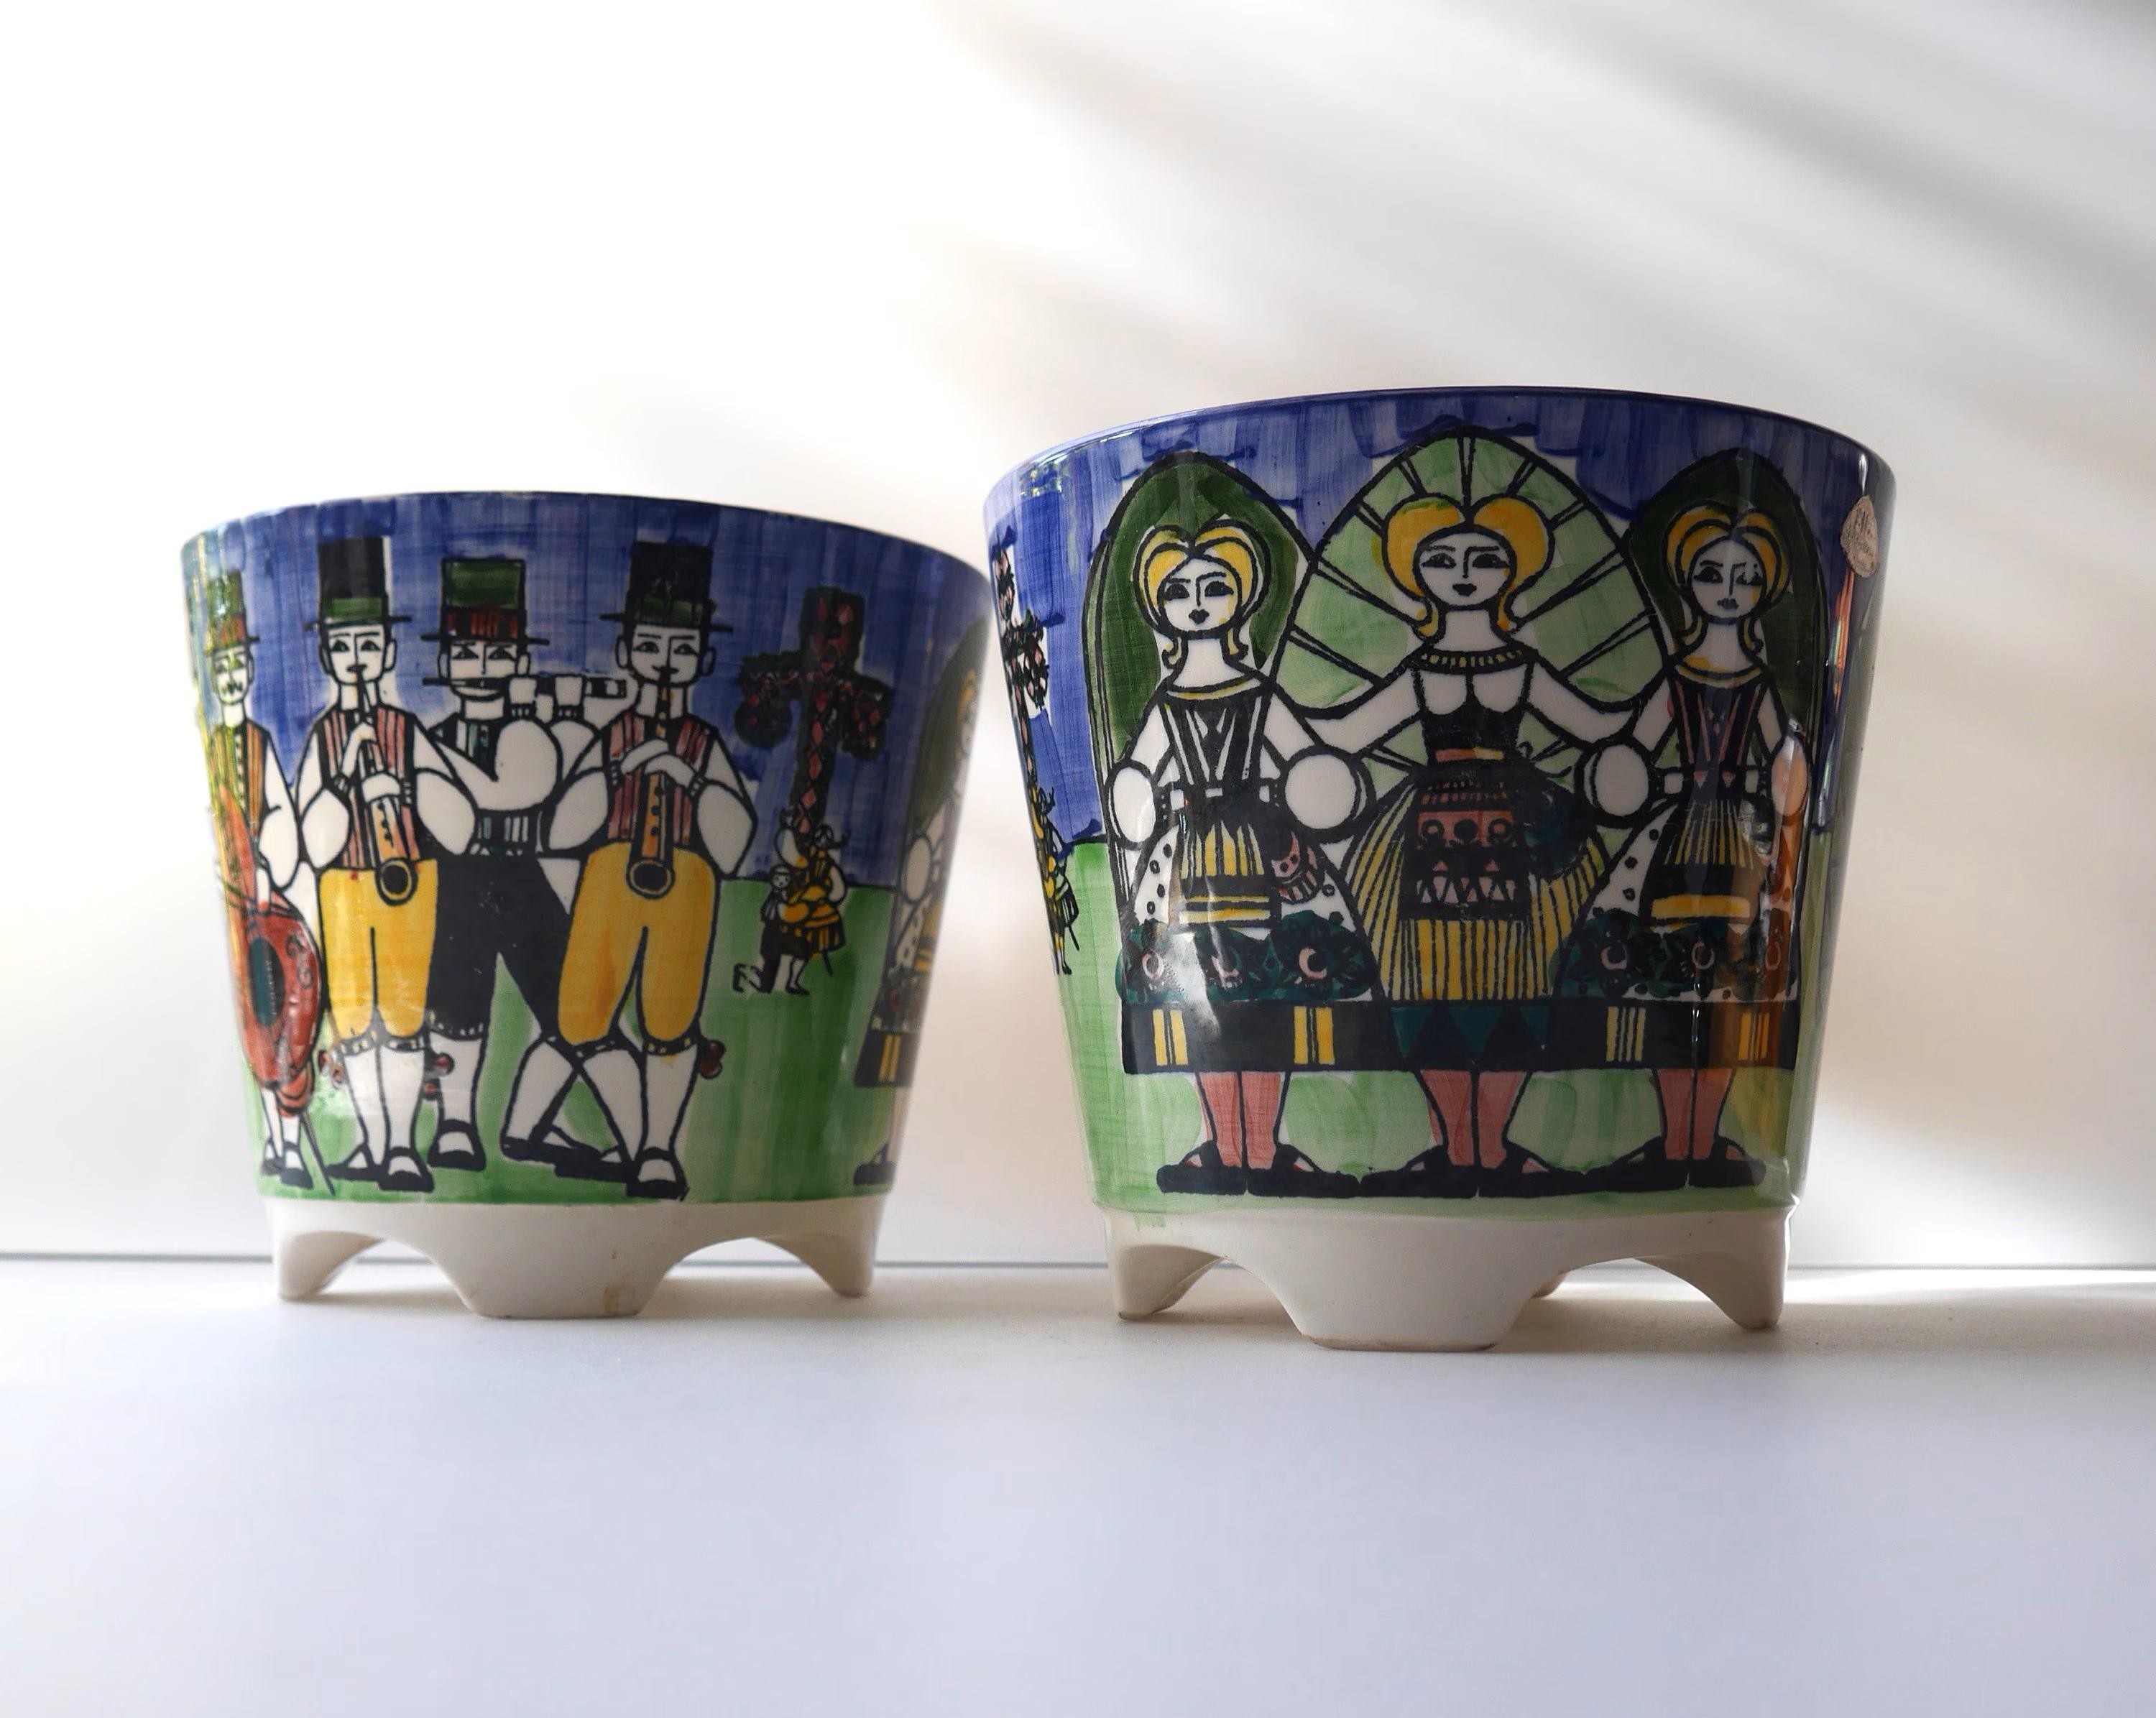 Mid-20th Century Flower pots or planters by Anita Nylund for Jie, Sweden For Sale